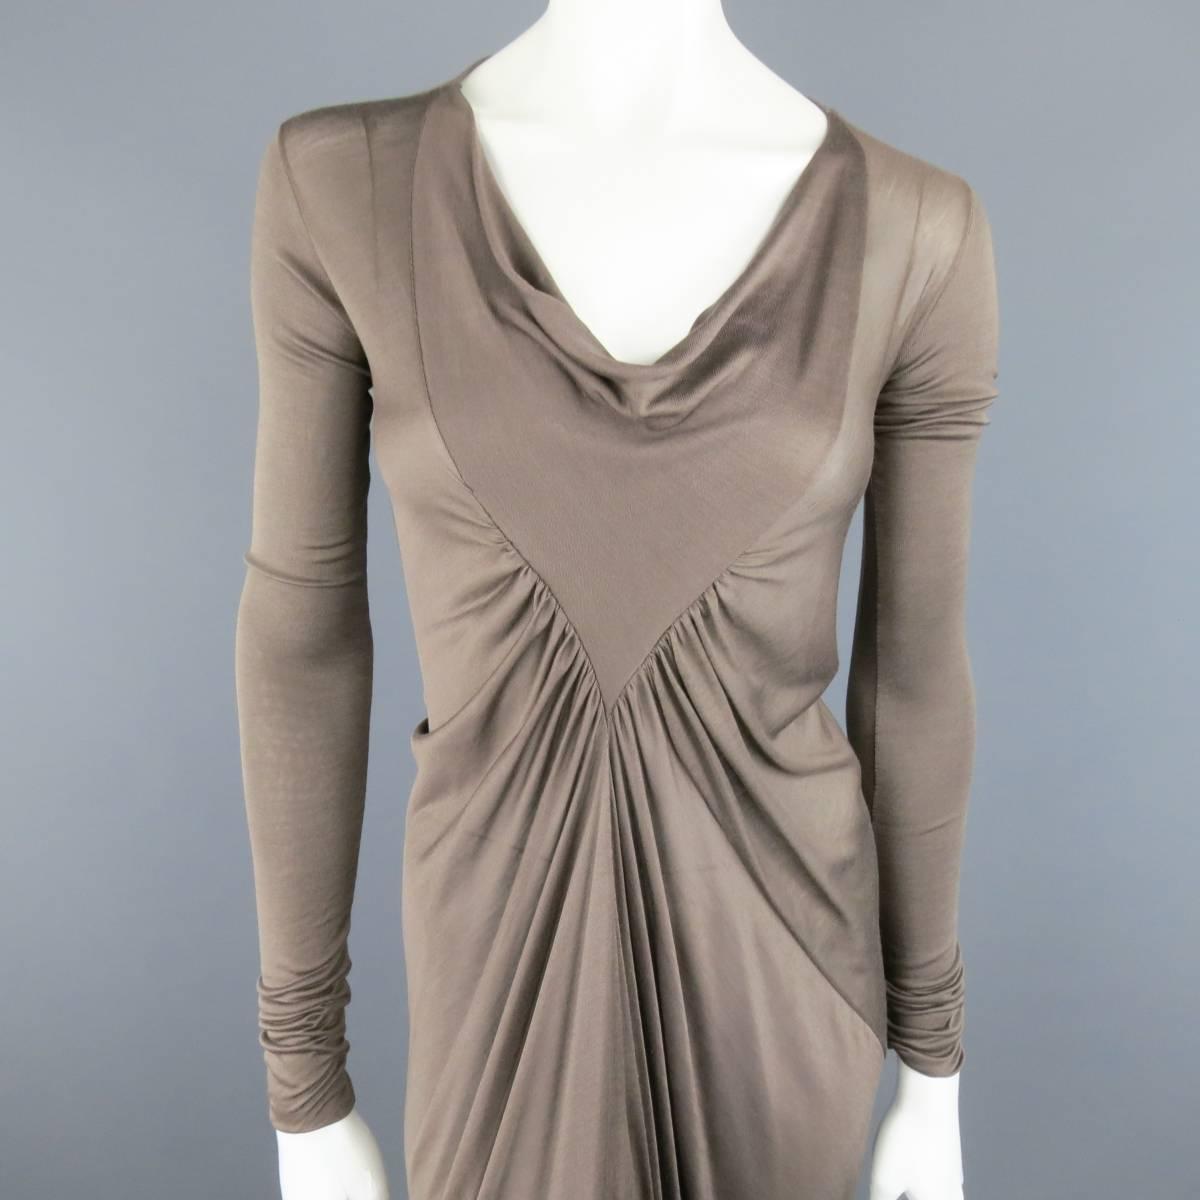 RICK OWENS taupe, silk blend dress features long sleeves, triangular scoop neck panel, and gathered body. Small run near right arm. As-Is. Made in Italy.
 
Good Pre-Owned Condition.
Marked: 4 USA
 
Measurements:
 
Bust: 34 In.
Waist: 38 In.
Hips: 38